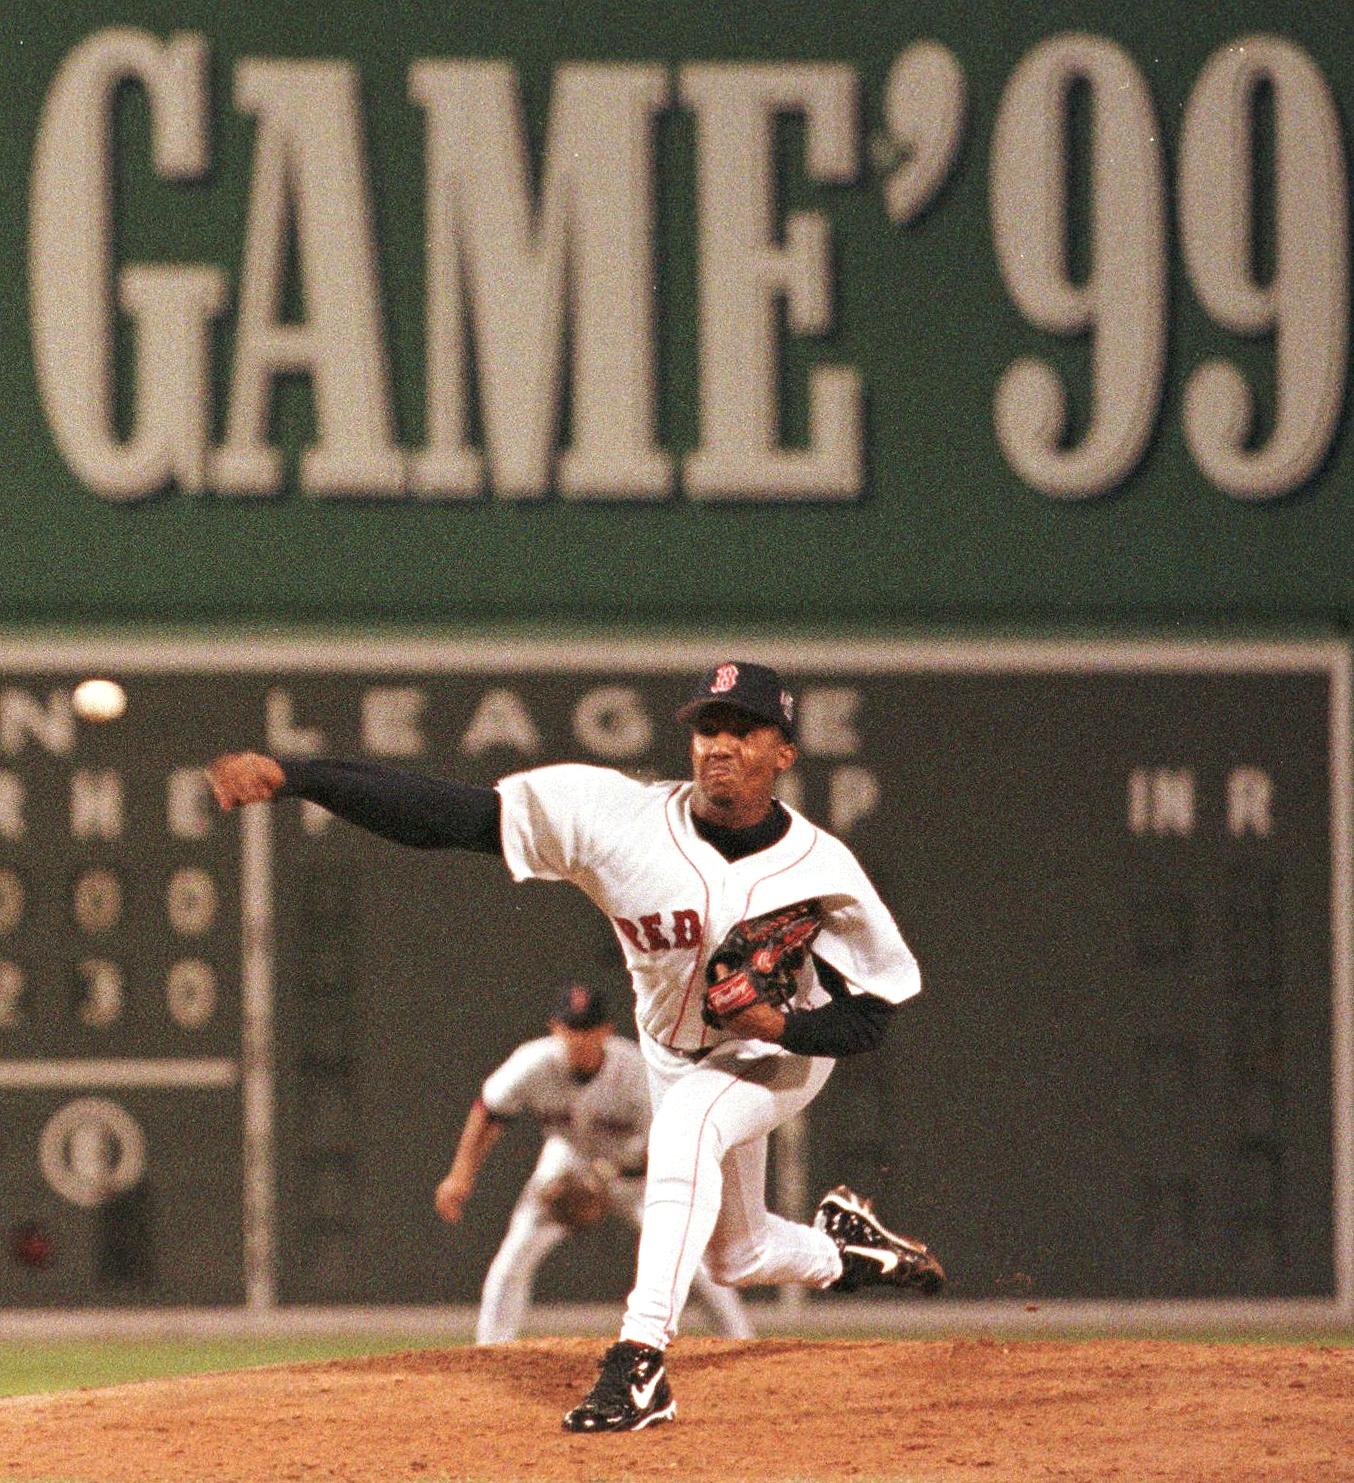 Pedro Martinez pitches in the 1999 All-Star Game at Fenway Park, with Nomar Garciaparra behind him at shortstop. (Photo by Bill Polo/AFP/Getty Images)